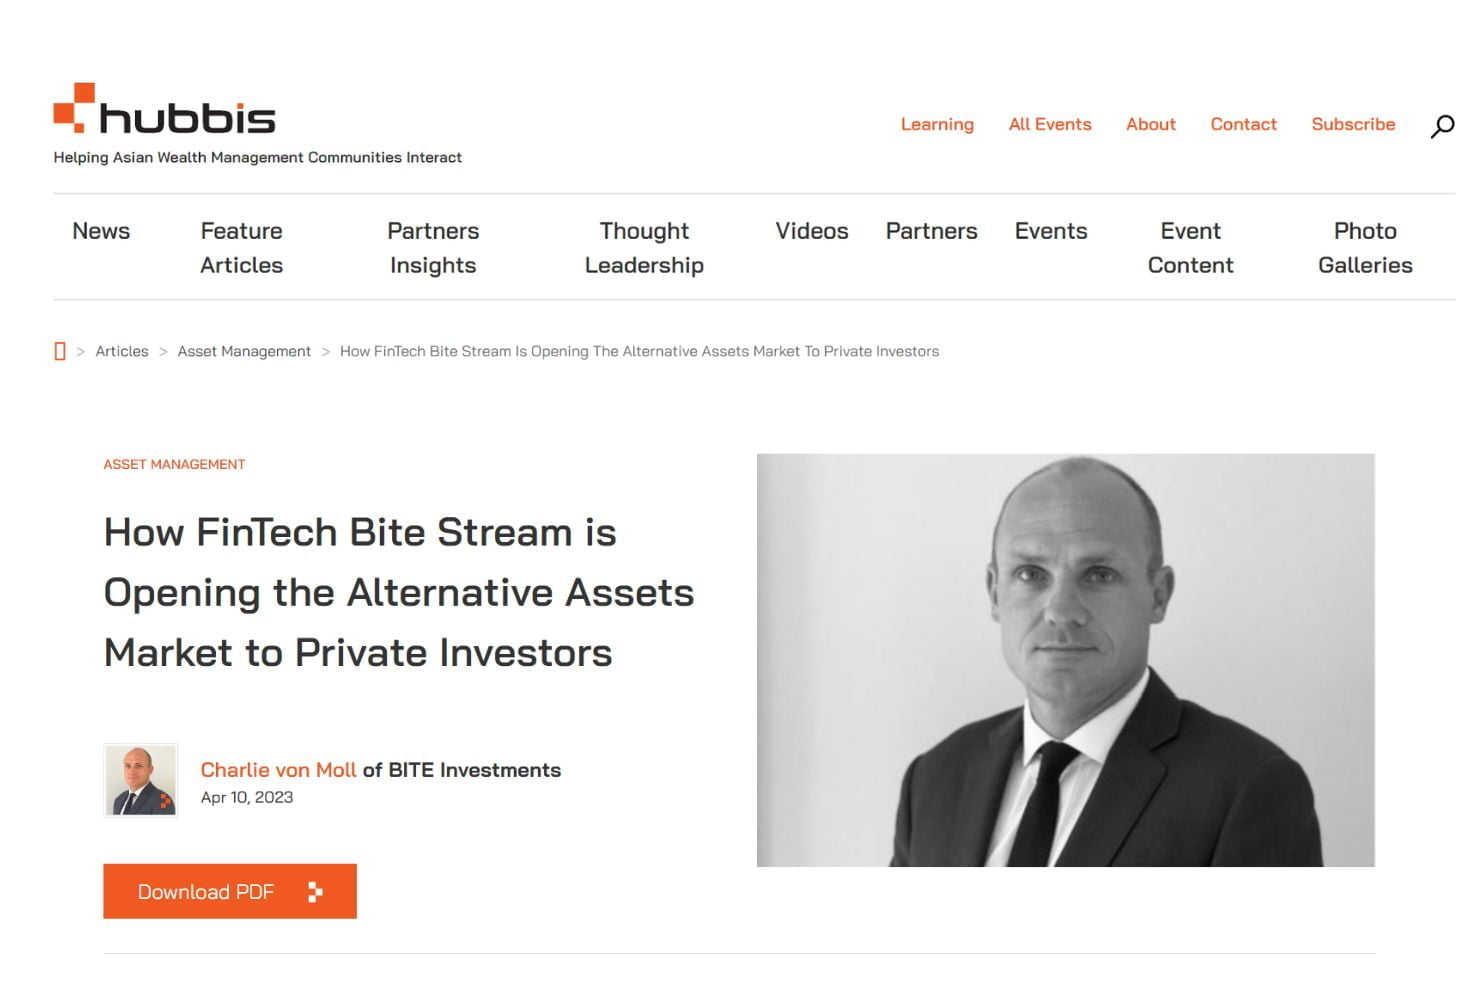 How FinTech Bite Stream Is Opening the Alternative Assets Market to Private Investors